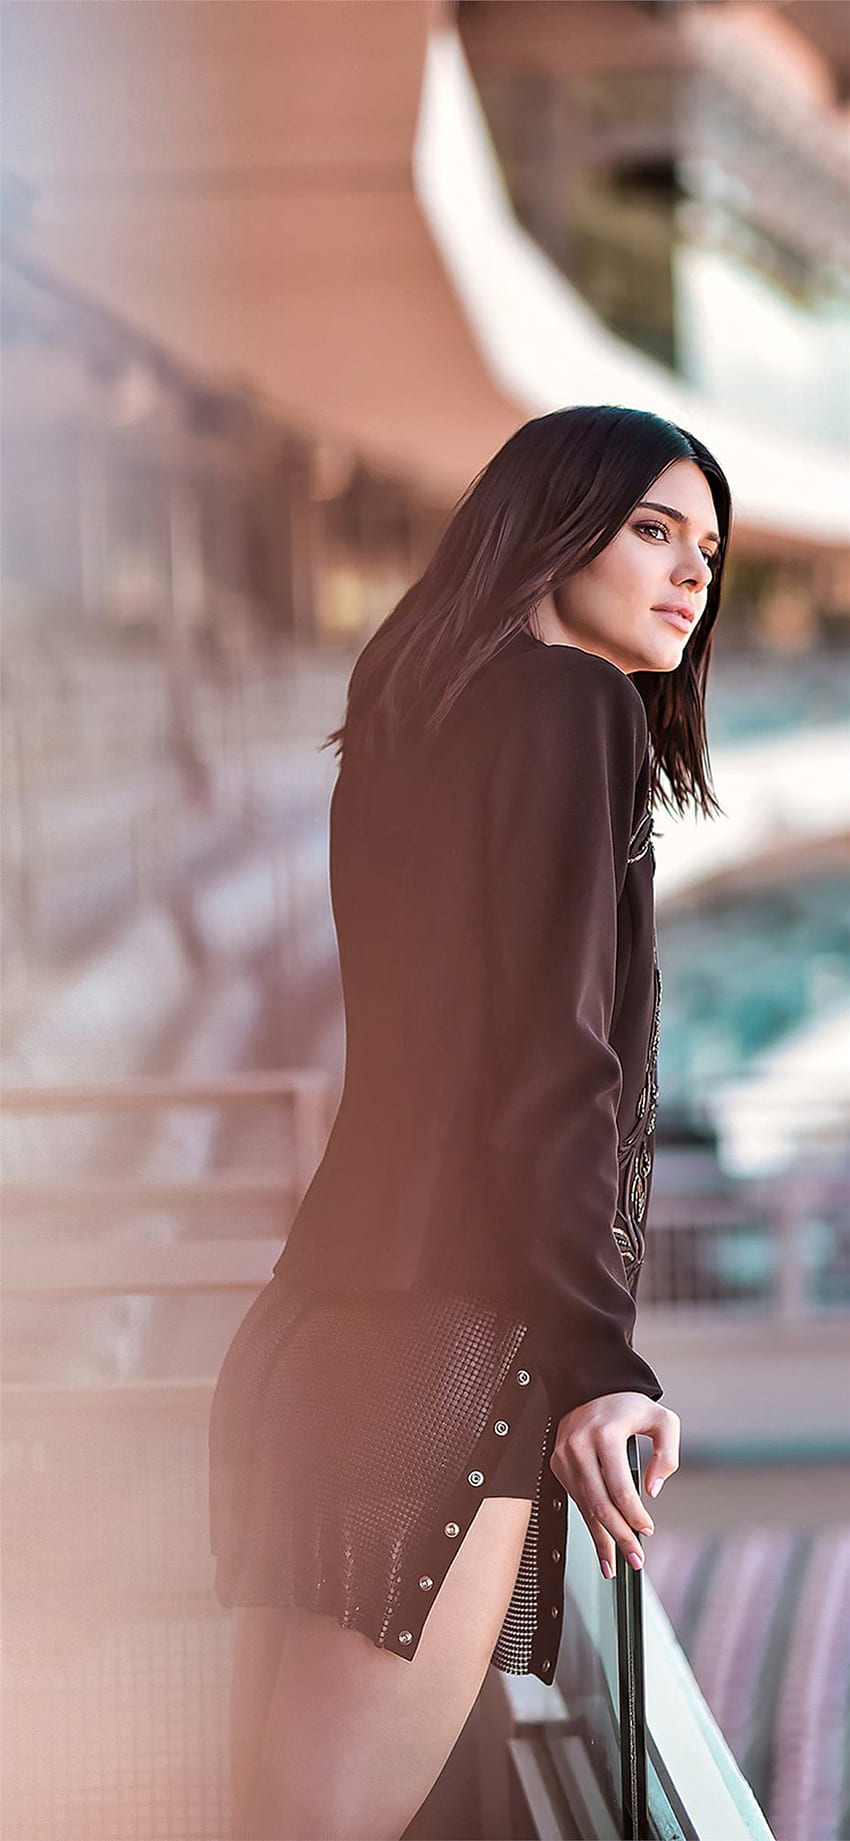 kendall jenner looking into distance iPhone X HD phone wallpaper